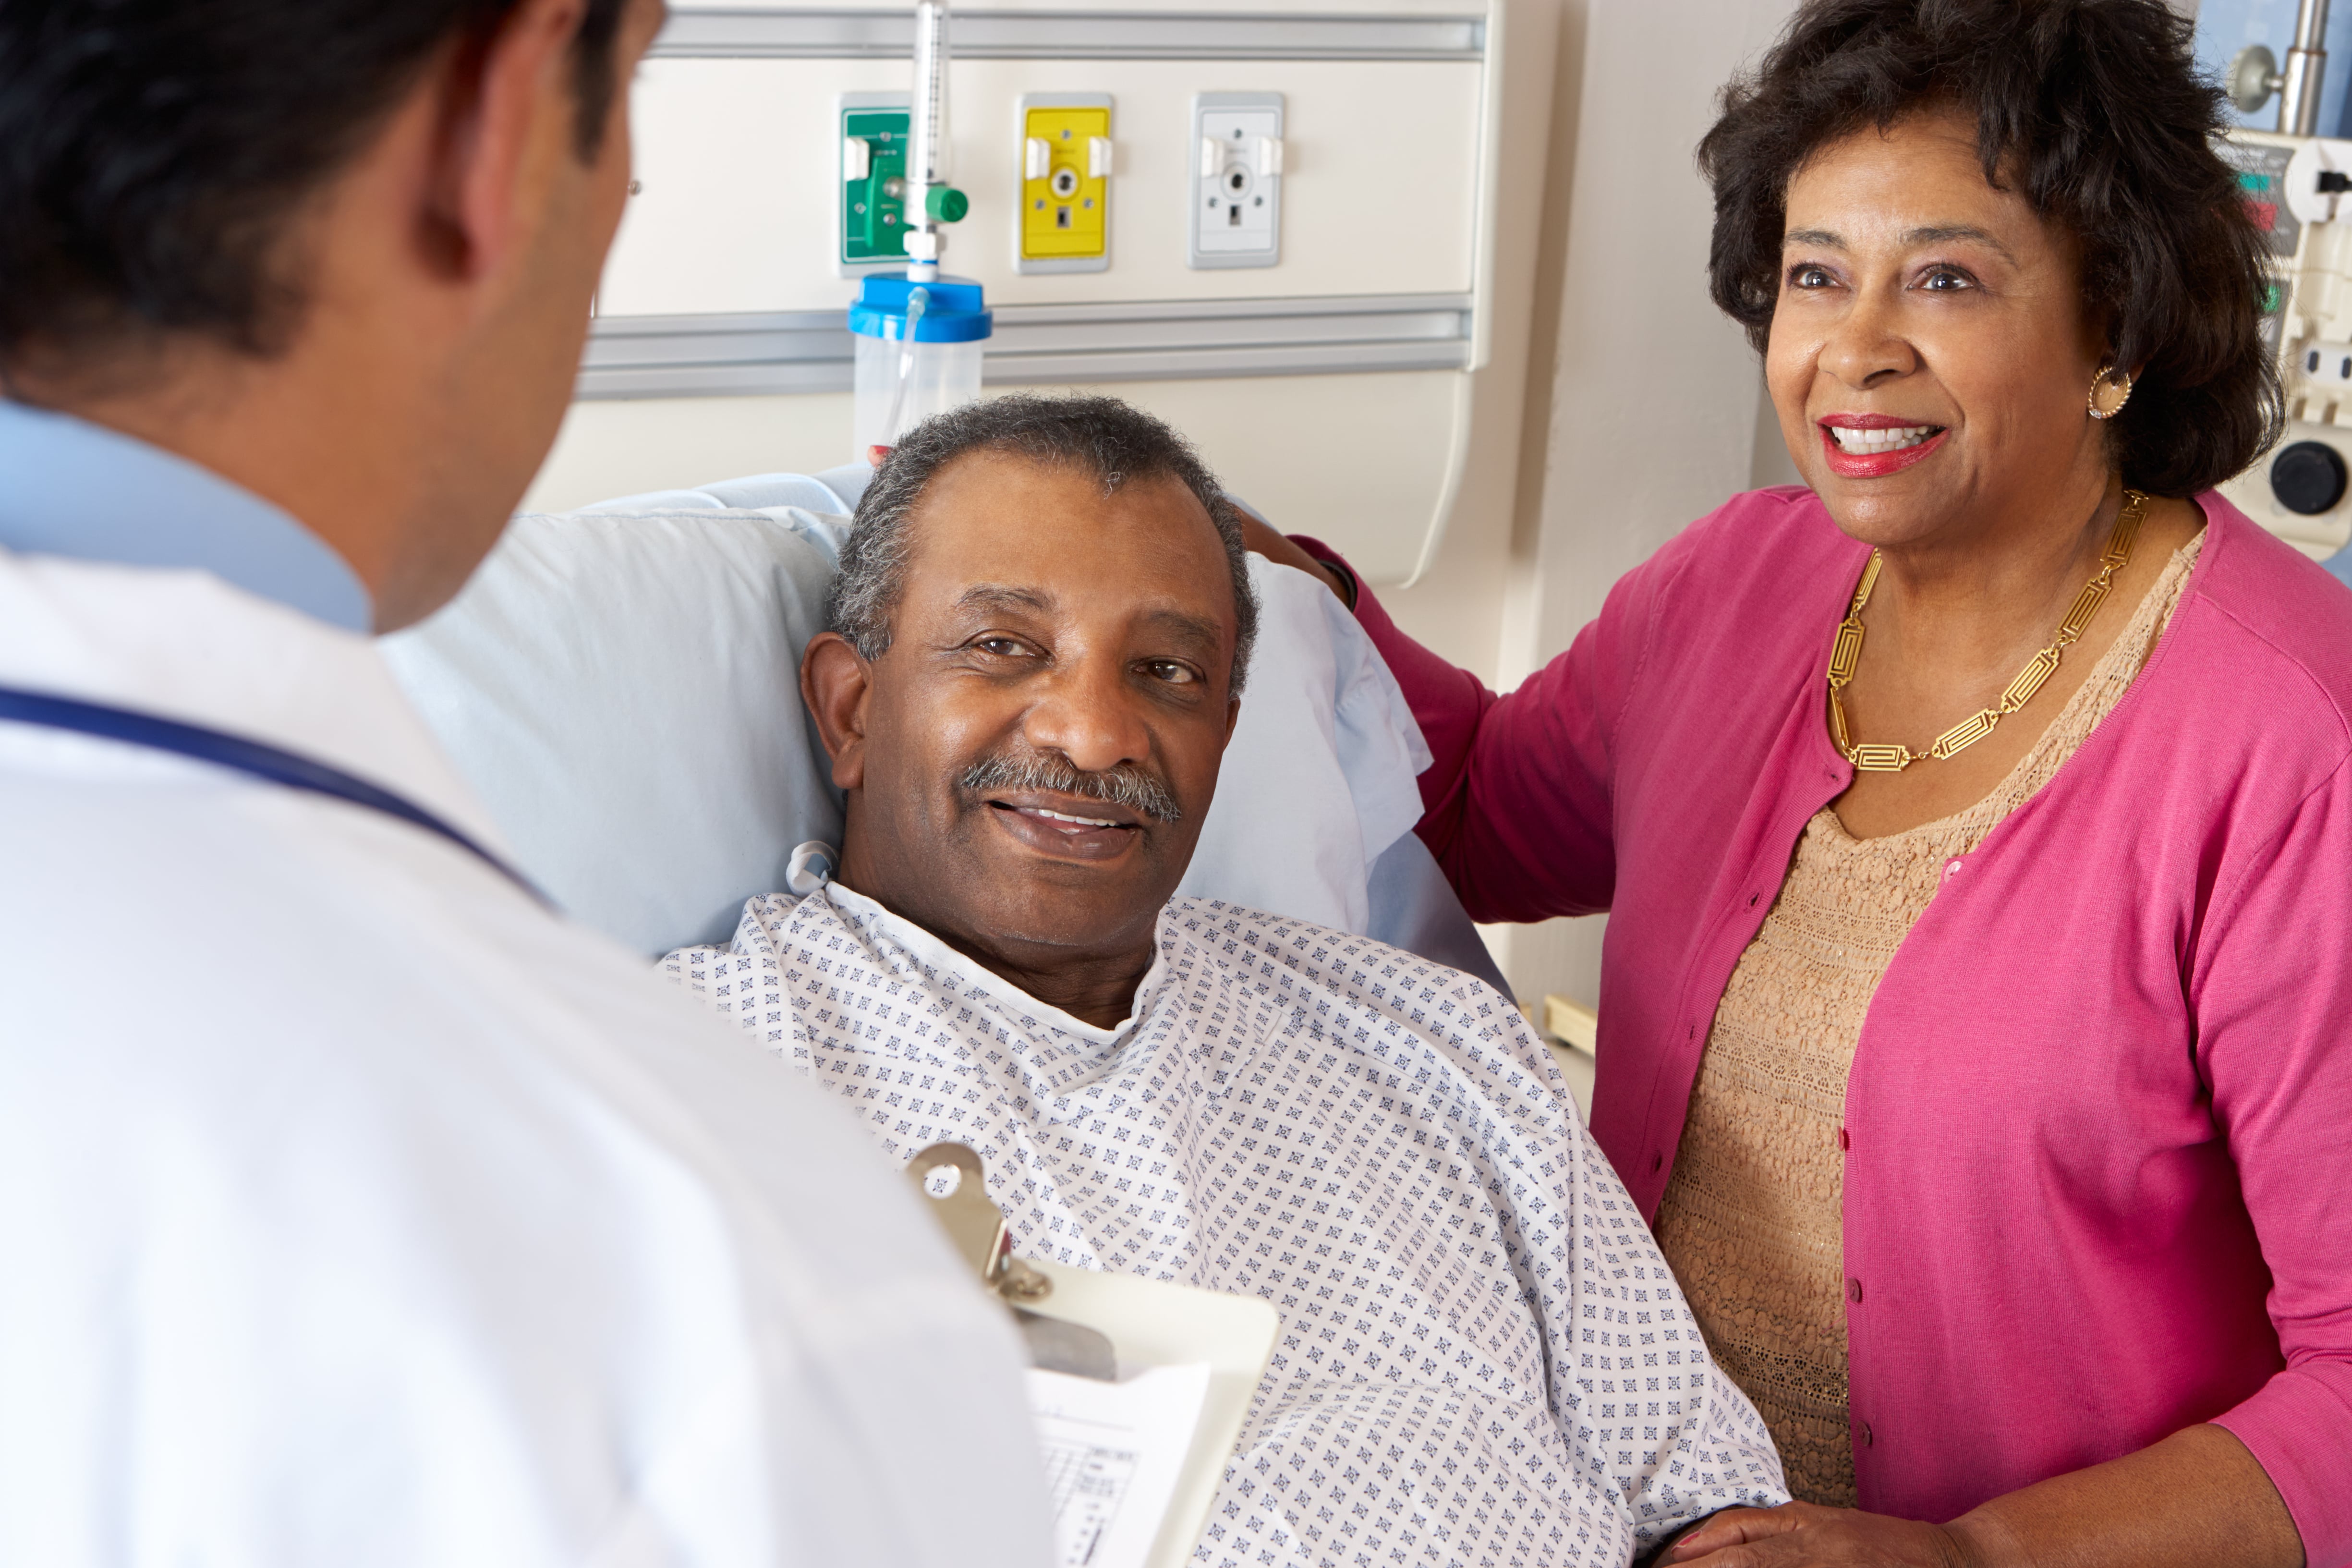 An hospitalized older adult and his caregiver listening to the doctor